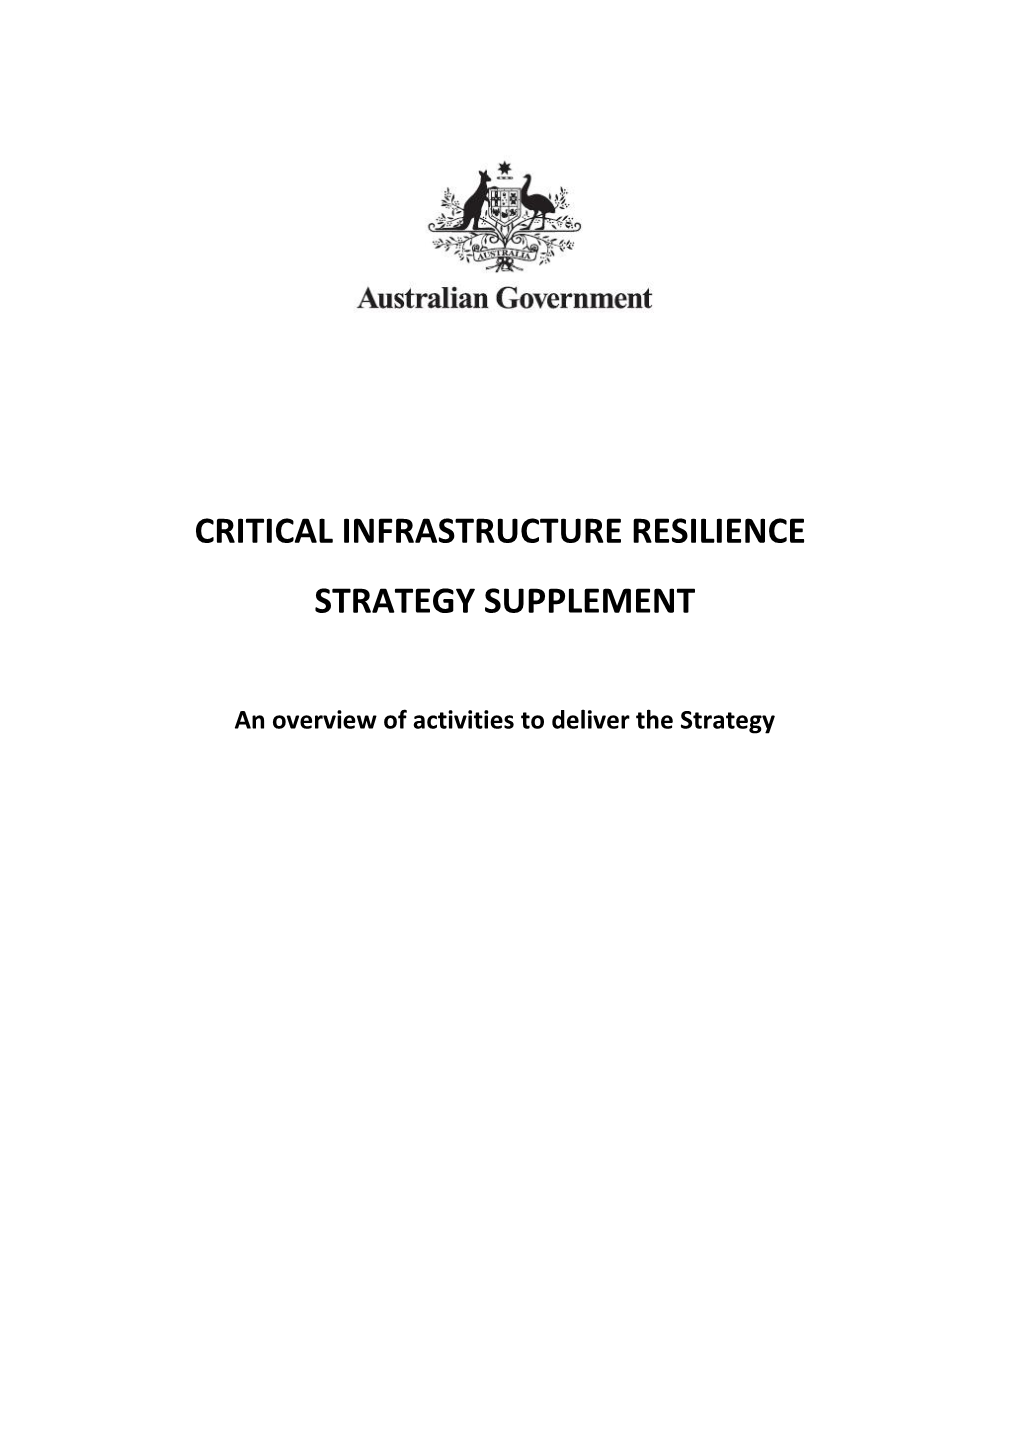 Australian Government S Critical Infrastructure Resilience Strategy Supplement DOC 101KB